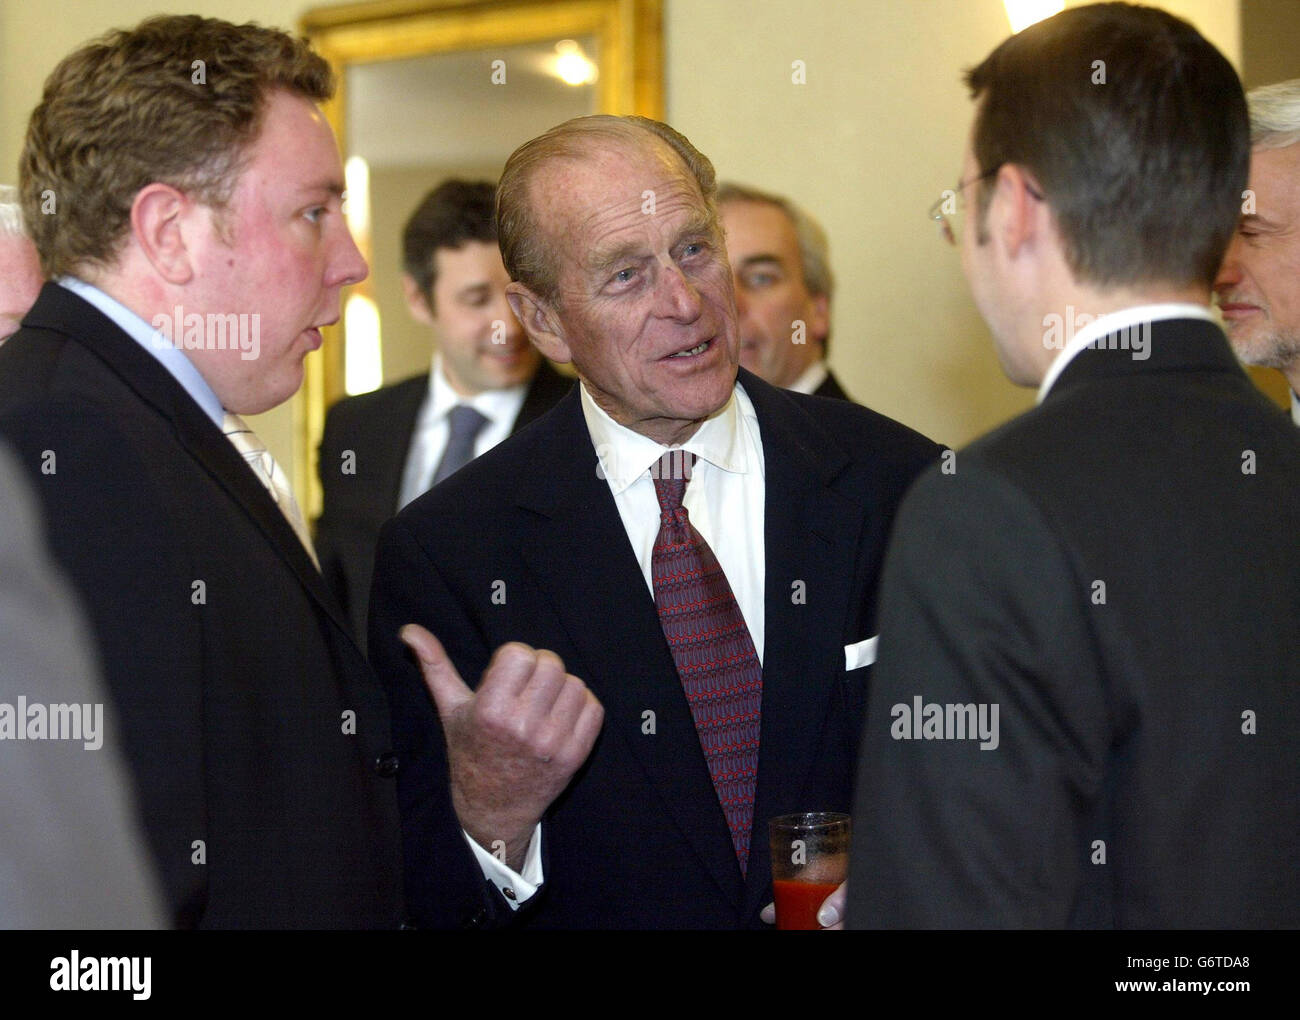 HRH Prince Philip, chats with guests at a Duke of Edinburgh award scheme, at the Hilton Hotel in Templepatrick Co Antrim, Ireland. Prince Philip was on a one day visit to the province, to carry out a number of engagements in connection with the award scheme. Stock Photo